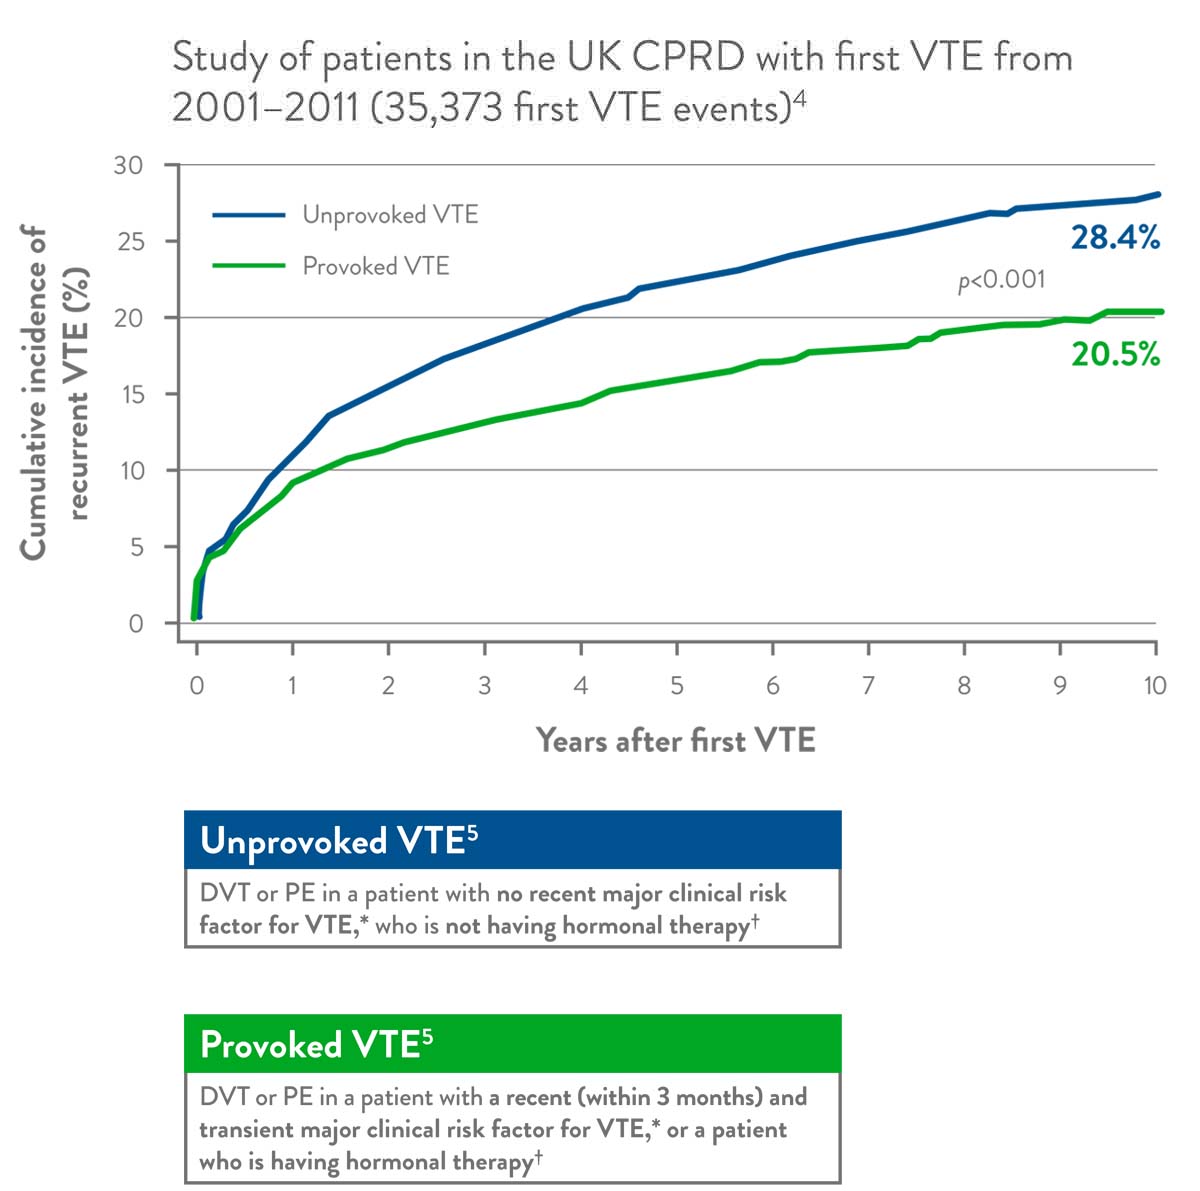 VTE recurrence is higher in unprovoked VTE